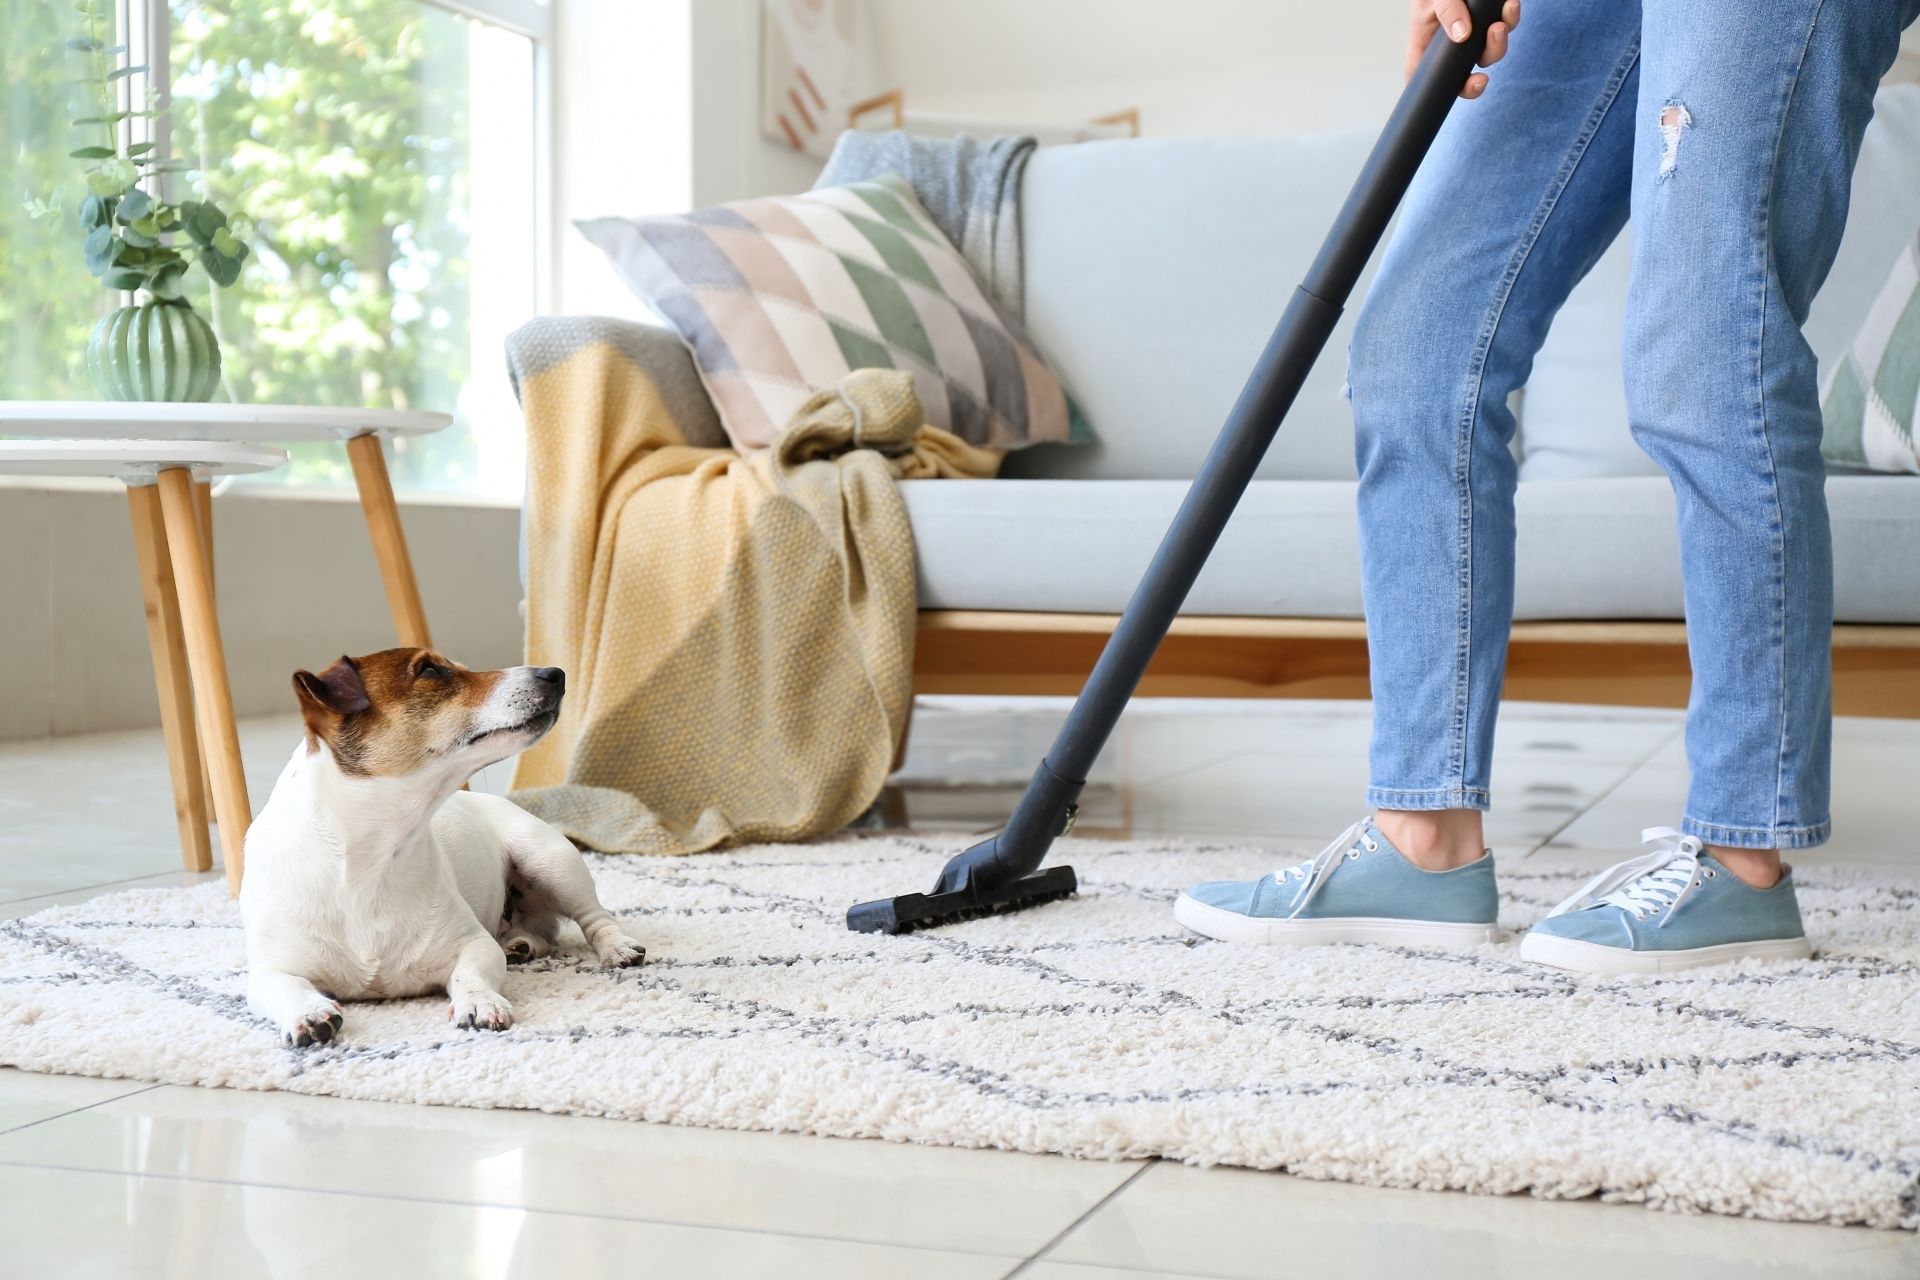 Dog in living room woman vacuuming rug with couch and plant in background